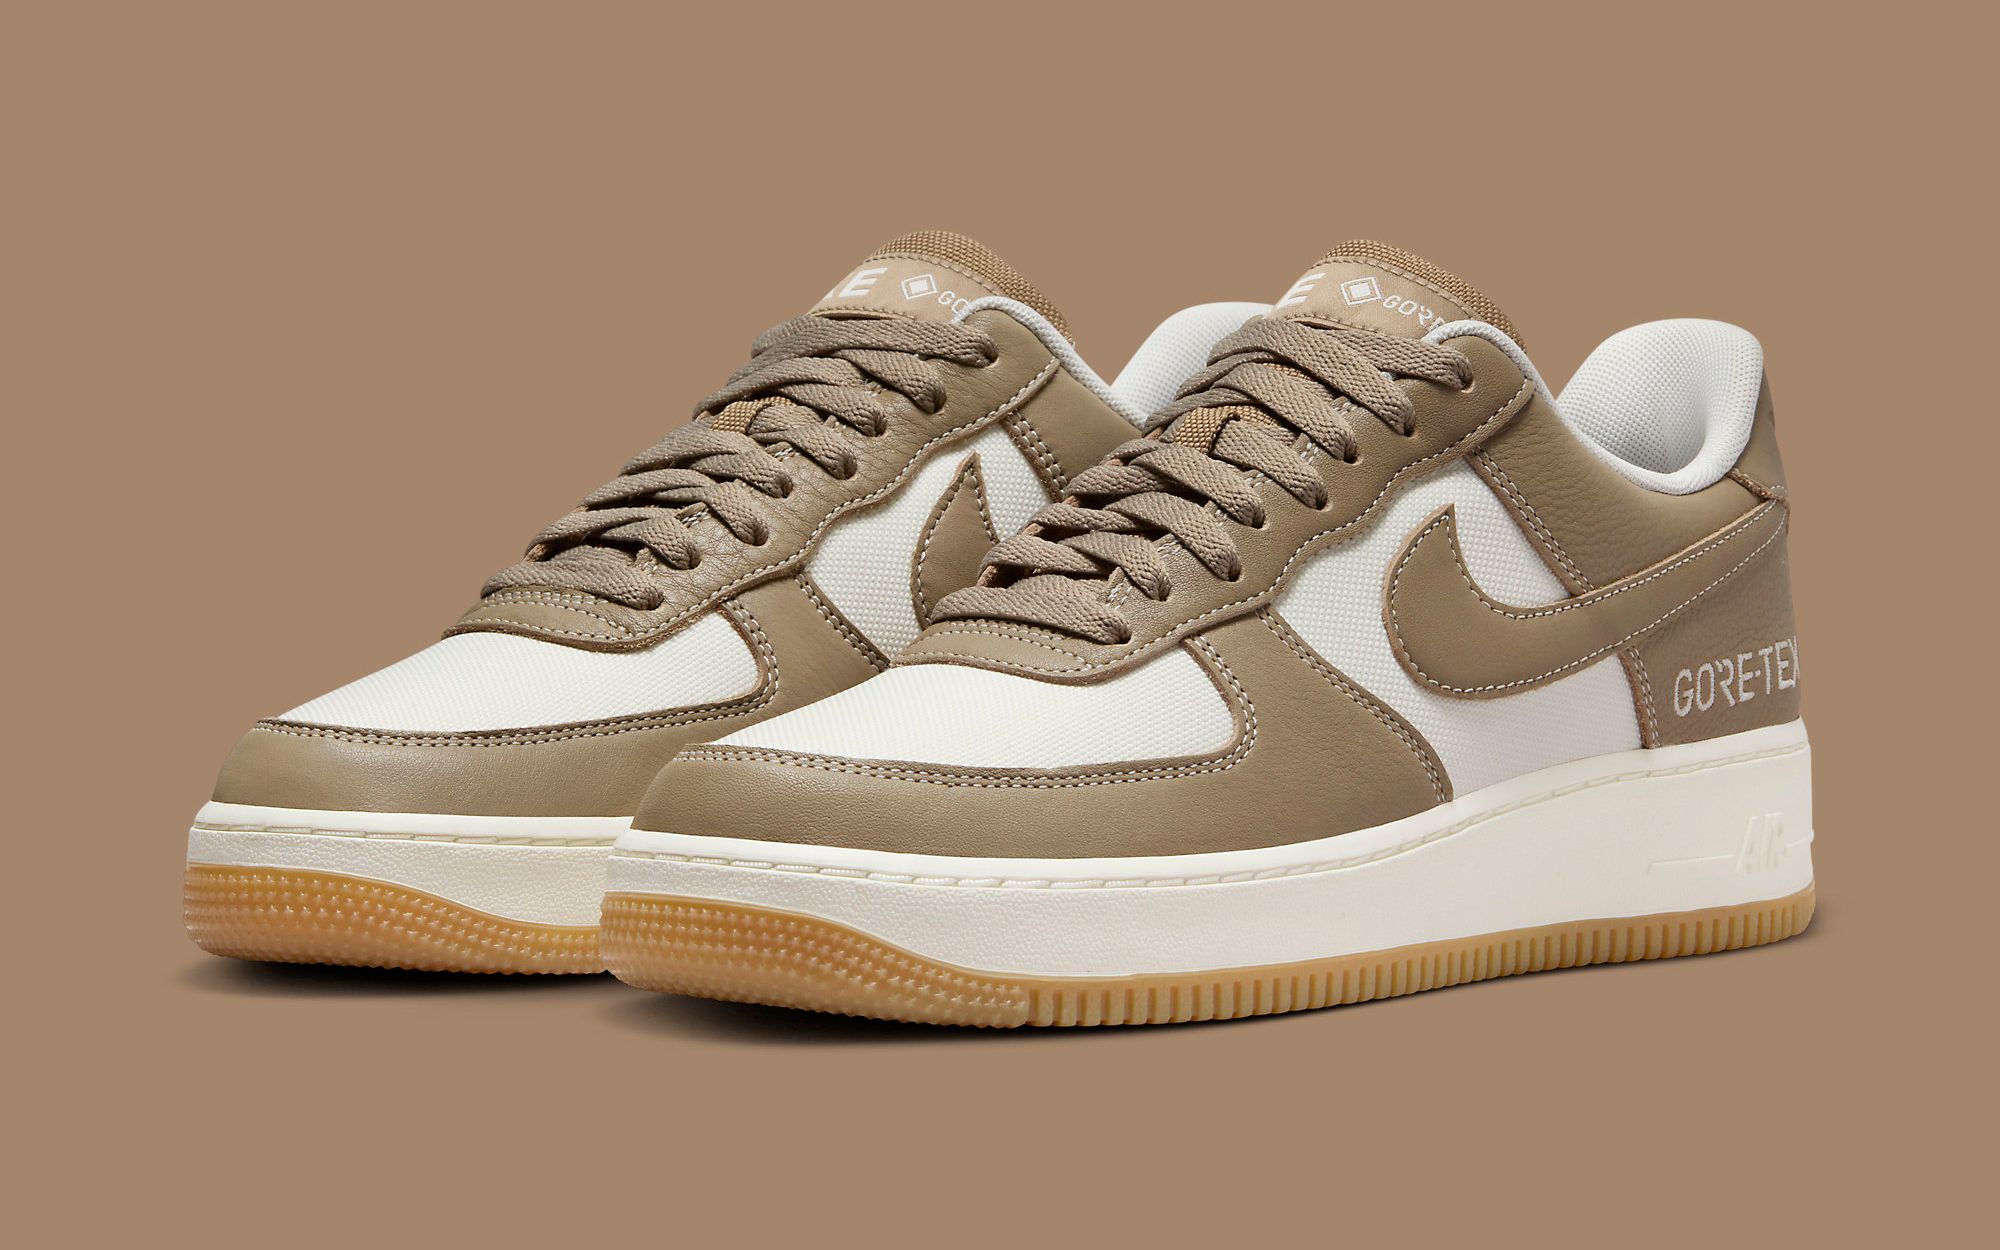 The Nike Air Force 1 Low GORE-TEX Remerges for Hangul Day | House